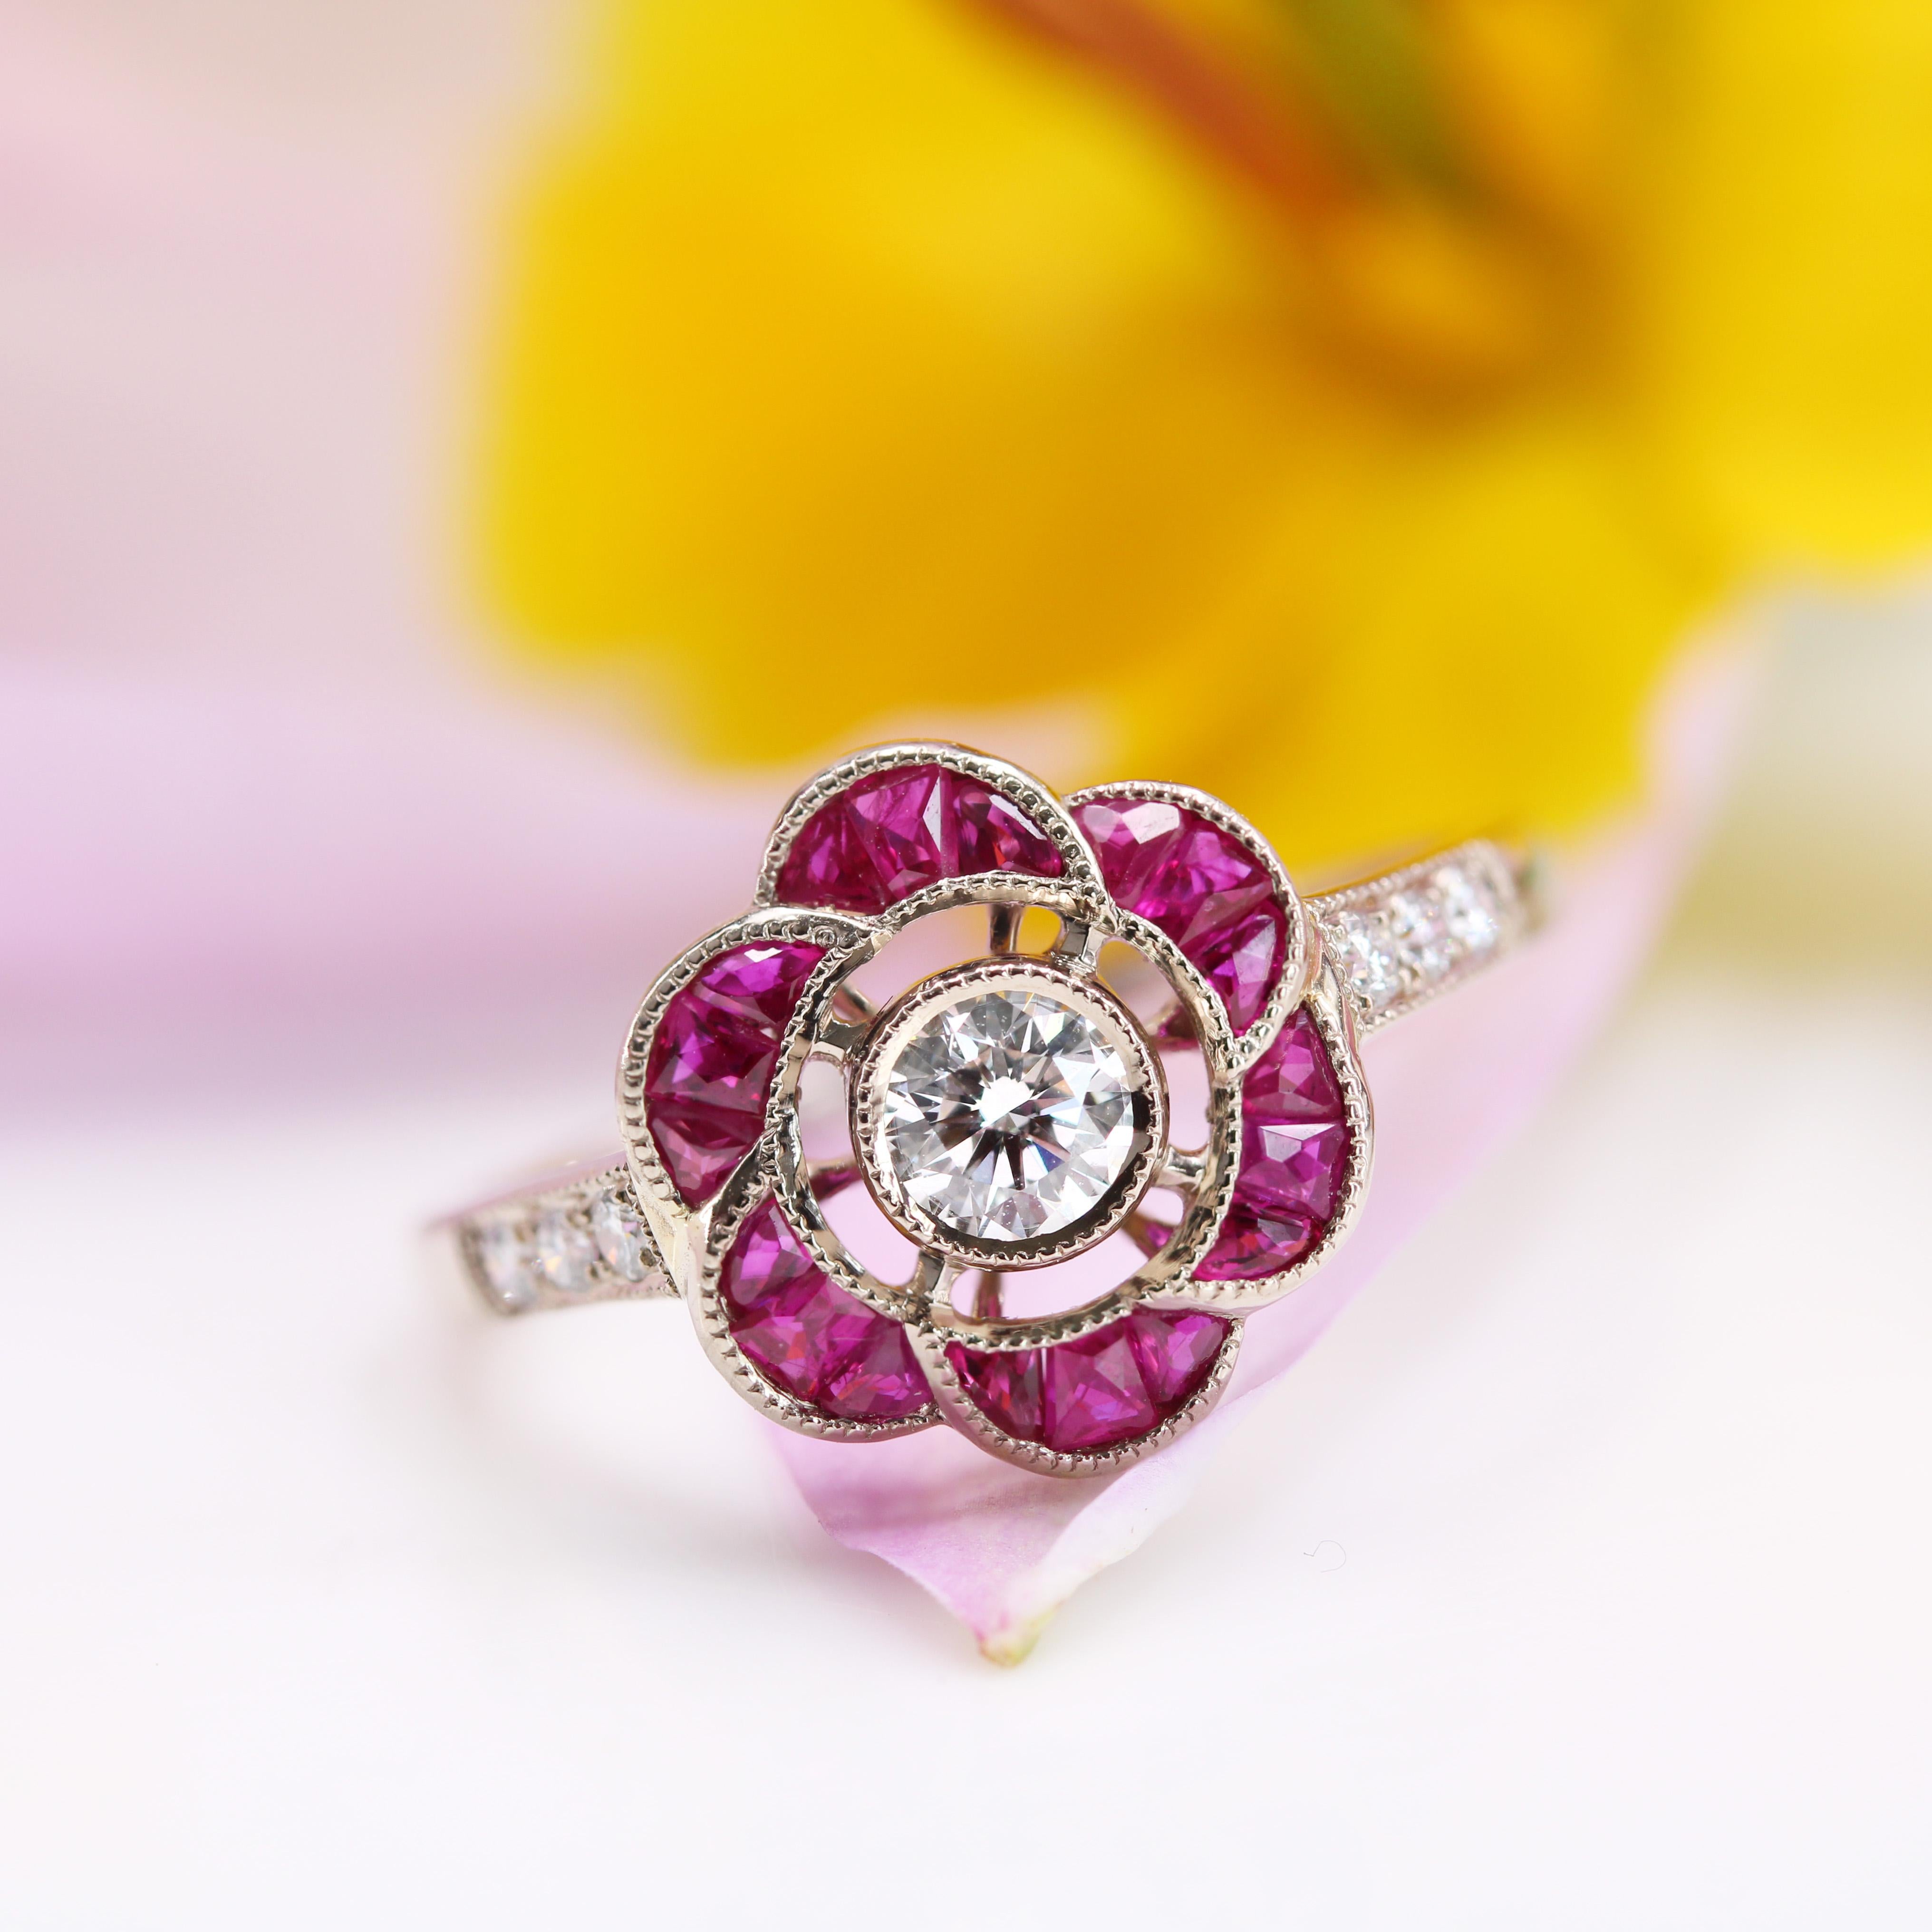 New Art Deco Style Calibrated Rubies Diamonds 18 Karat White Gold Flower Ring For Sale 10